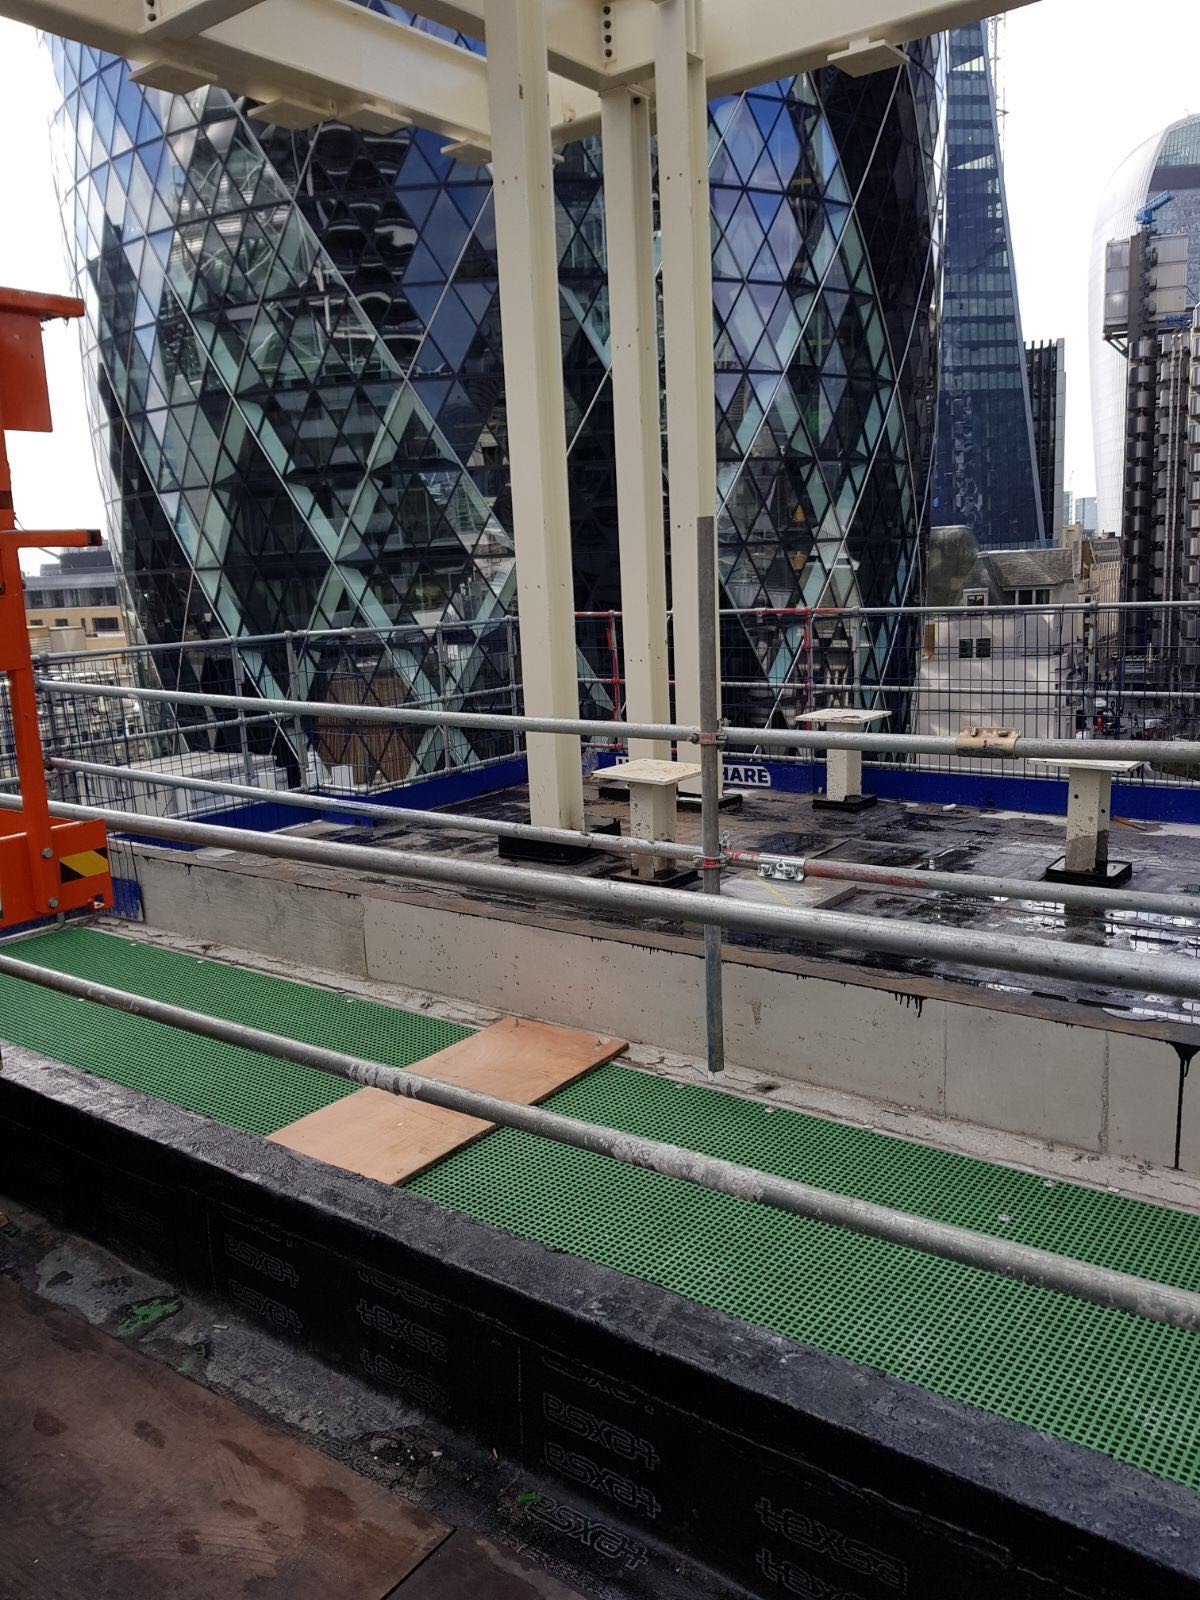 Green GRP open mesh grating used to make RiserDeck riser floors at a high-rise development in Bishops Gate, London